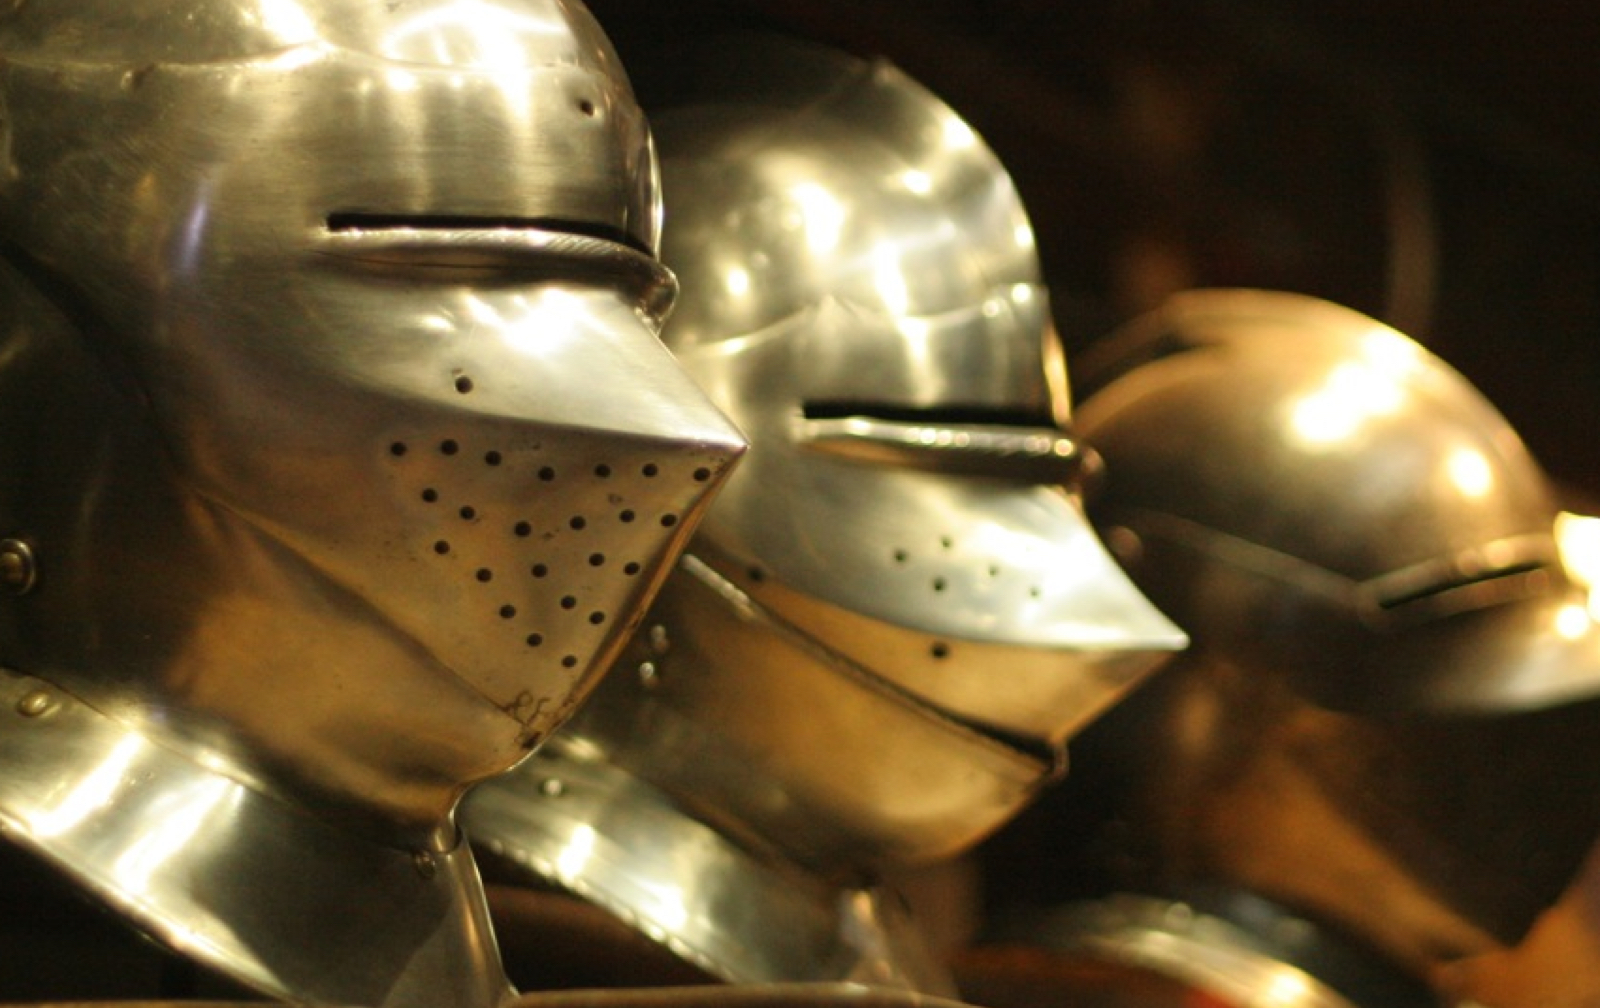 Photograph of medieval helmets